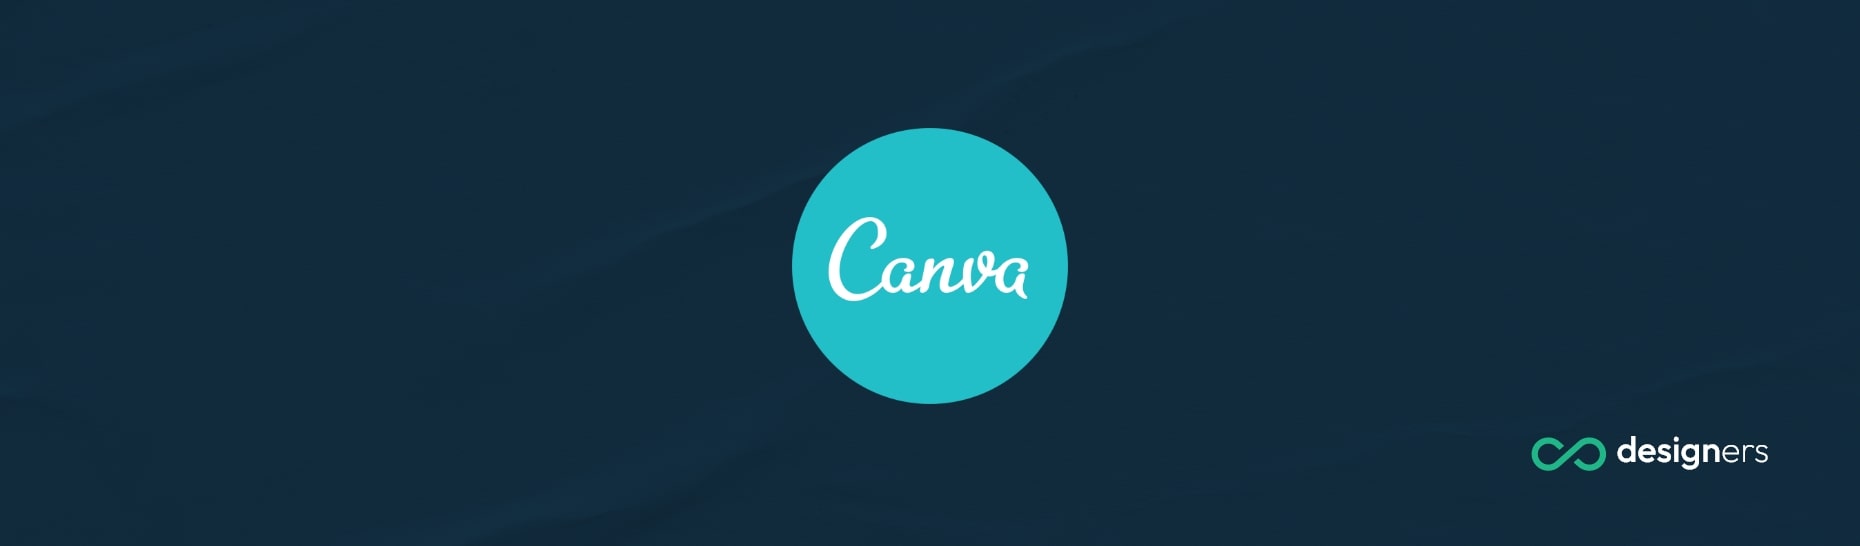 Is Canva a Software Tool?